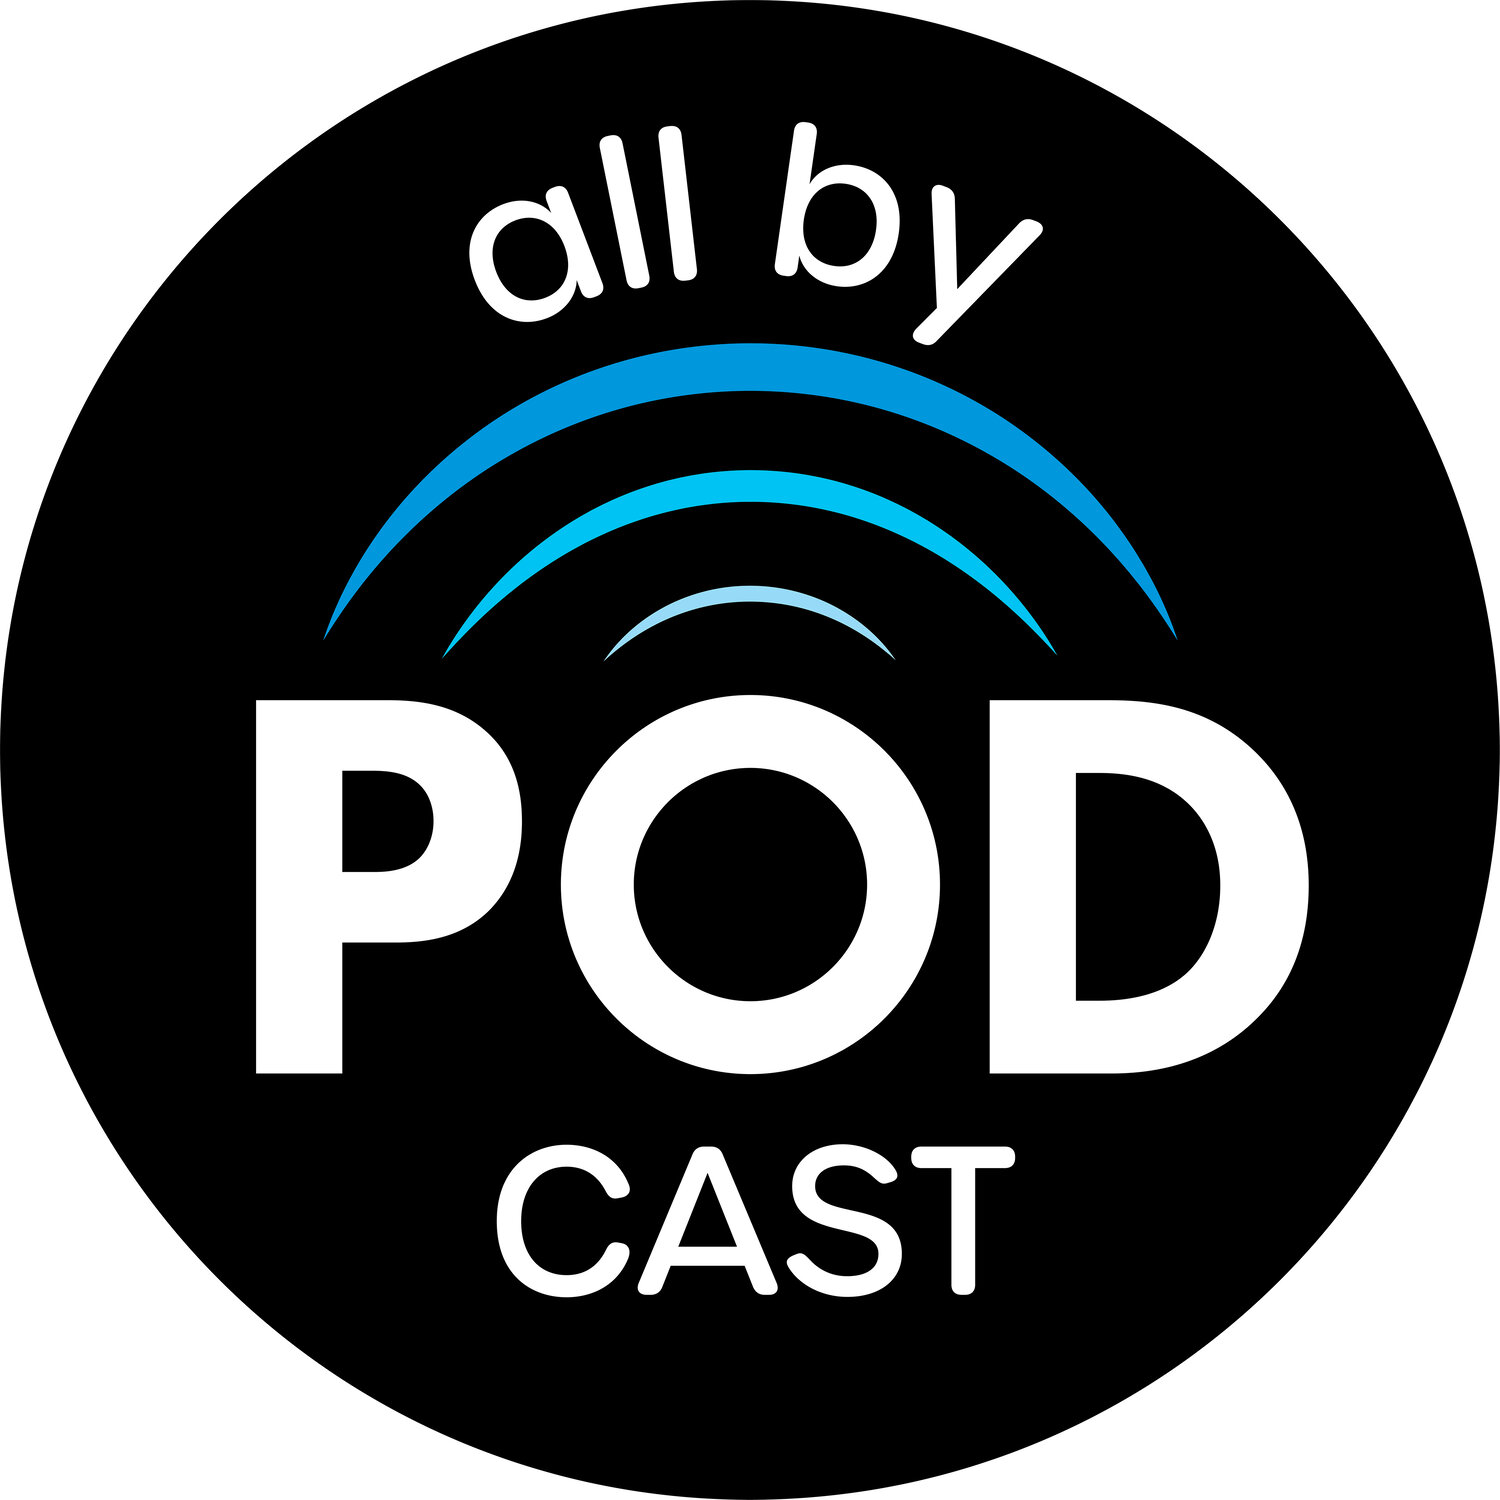 ALLbyPODCAST